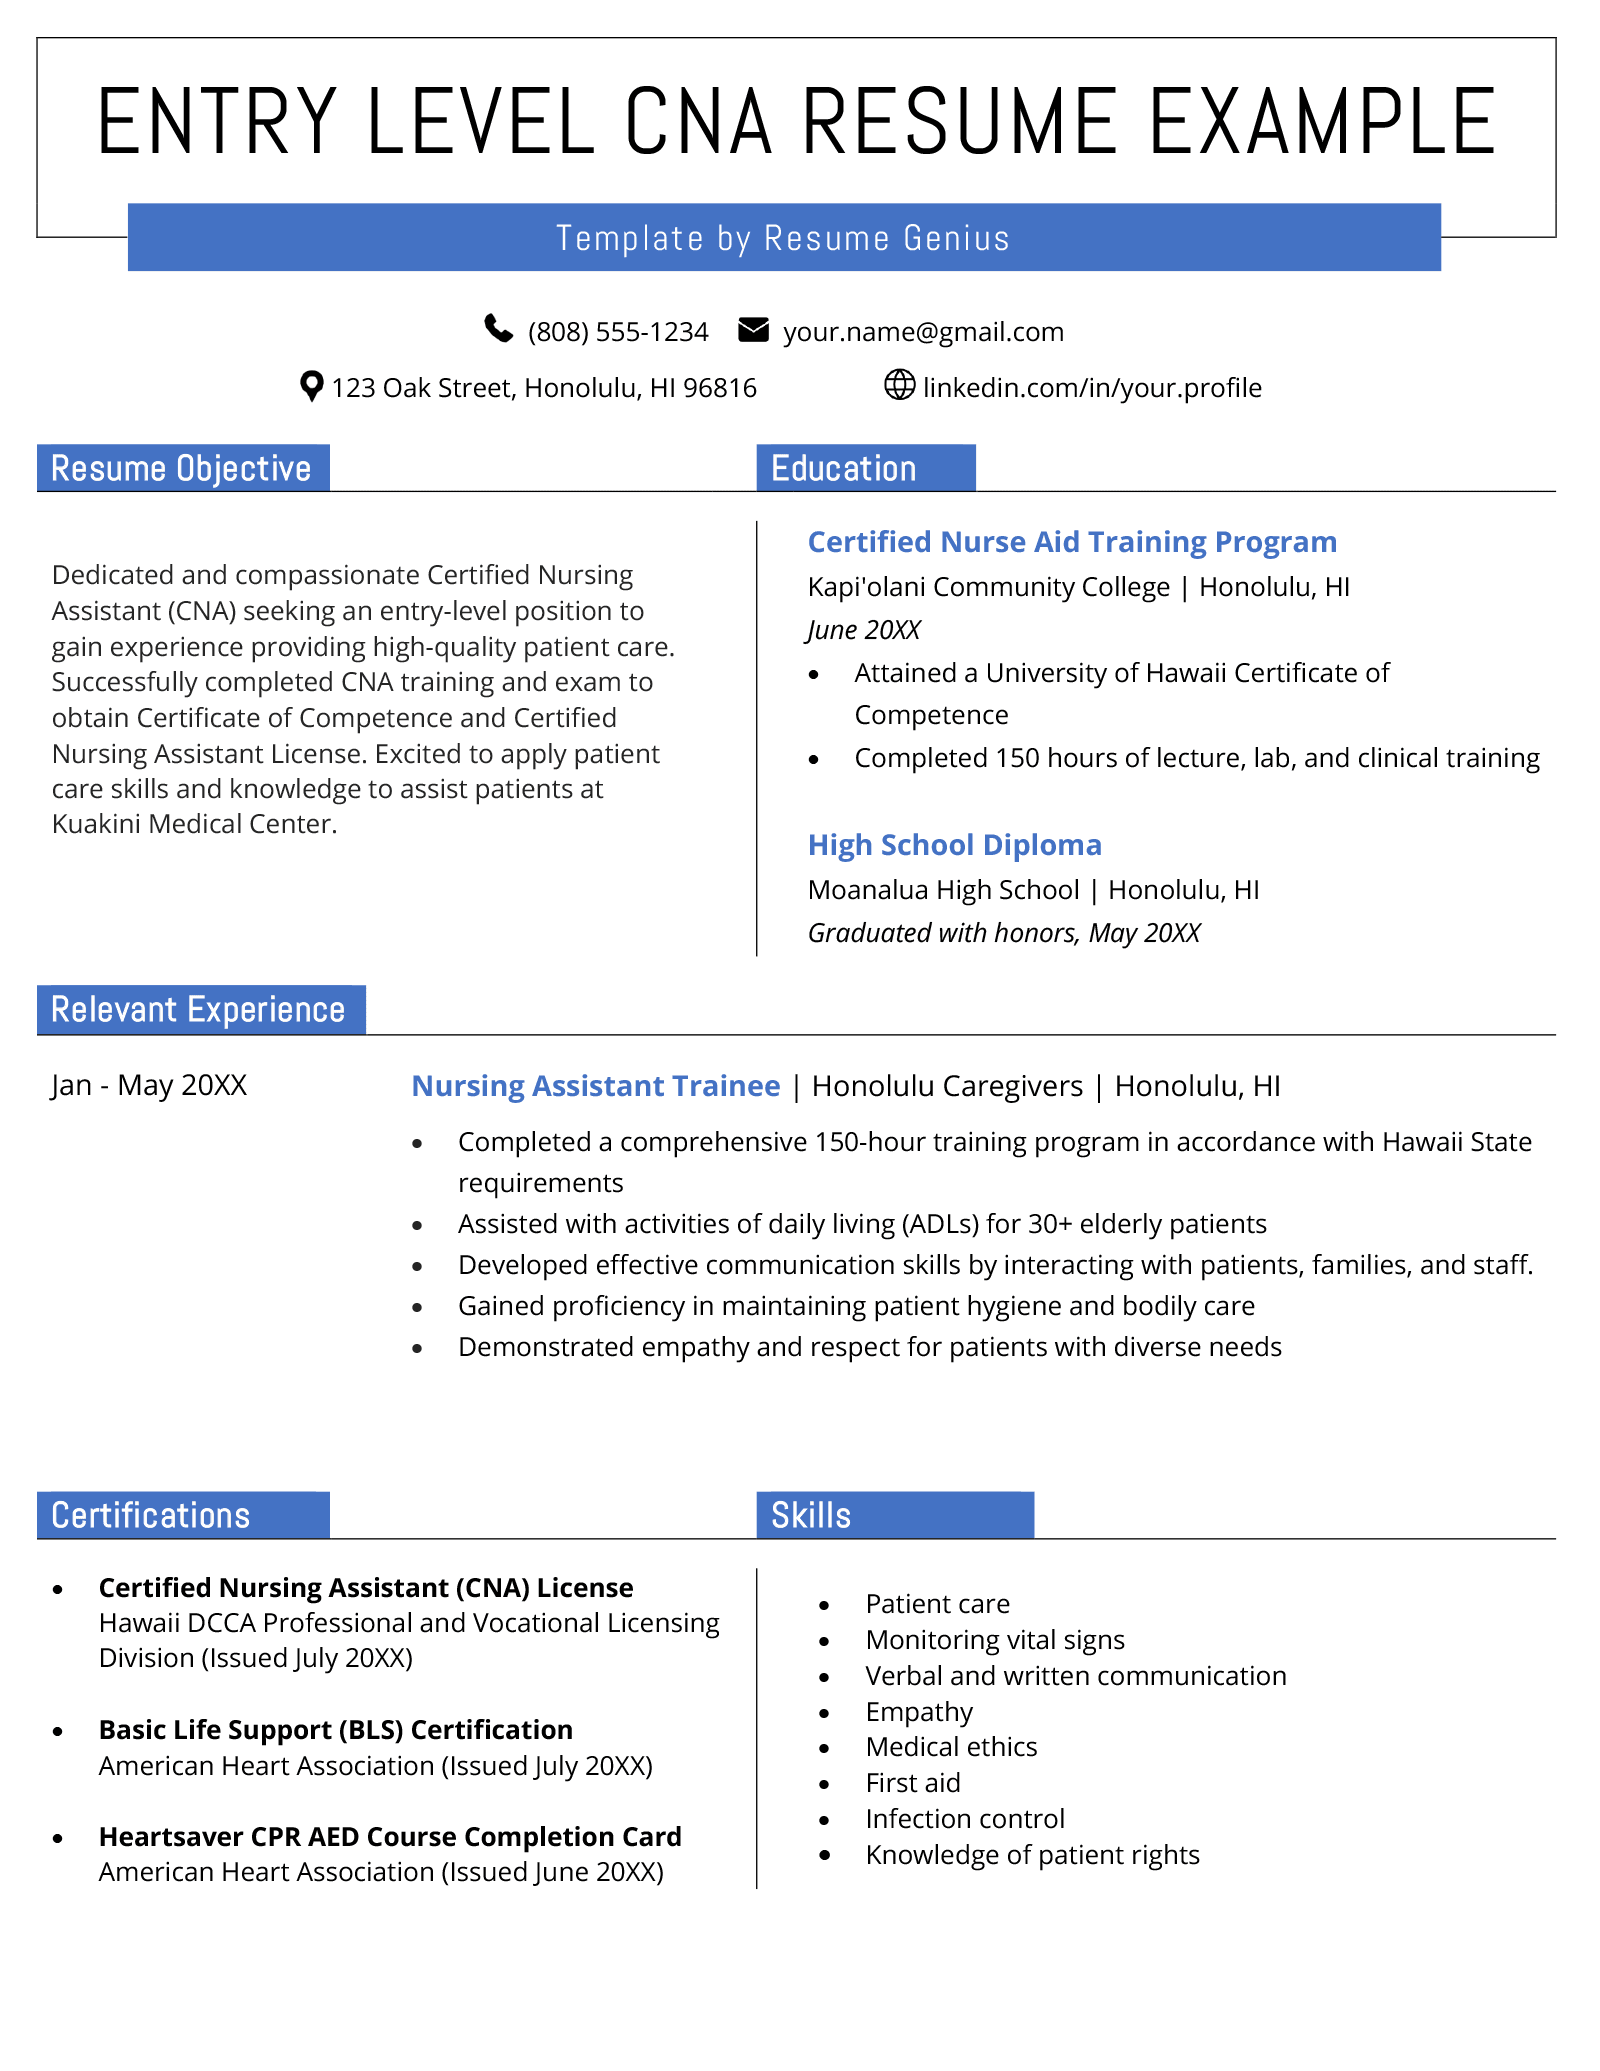 Example of an entry-level CNA resume with a layout that highlight's the candidate's relevant education, experience, and certifications, with a large header and blue section headings.